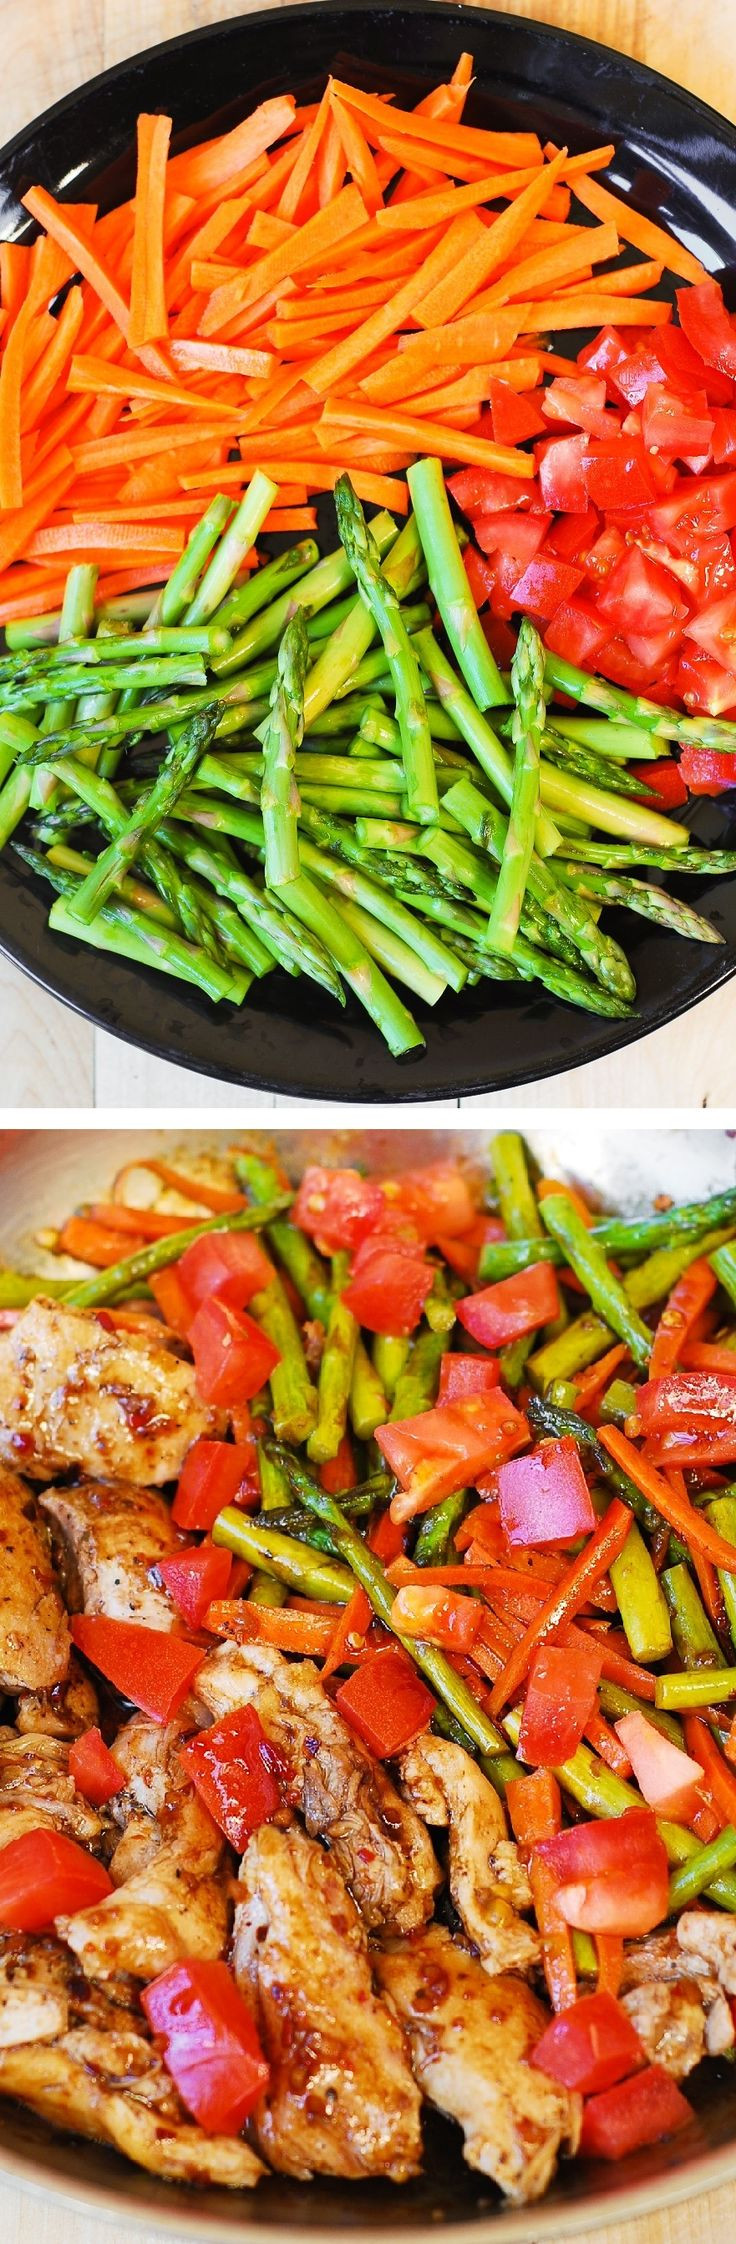 Healthy Low Fat Recipes For Weight Loss
 175 best images about low or no salt recipes on Pinterest